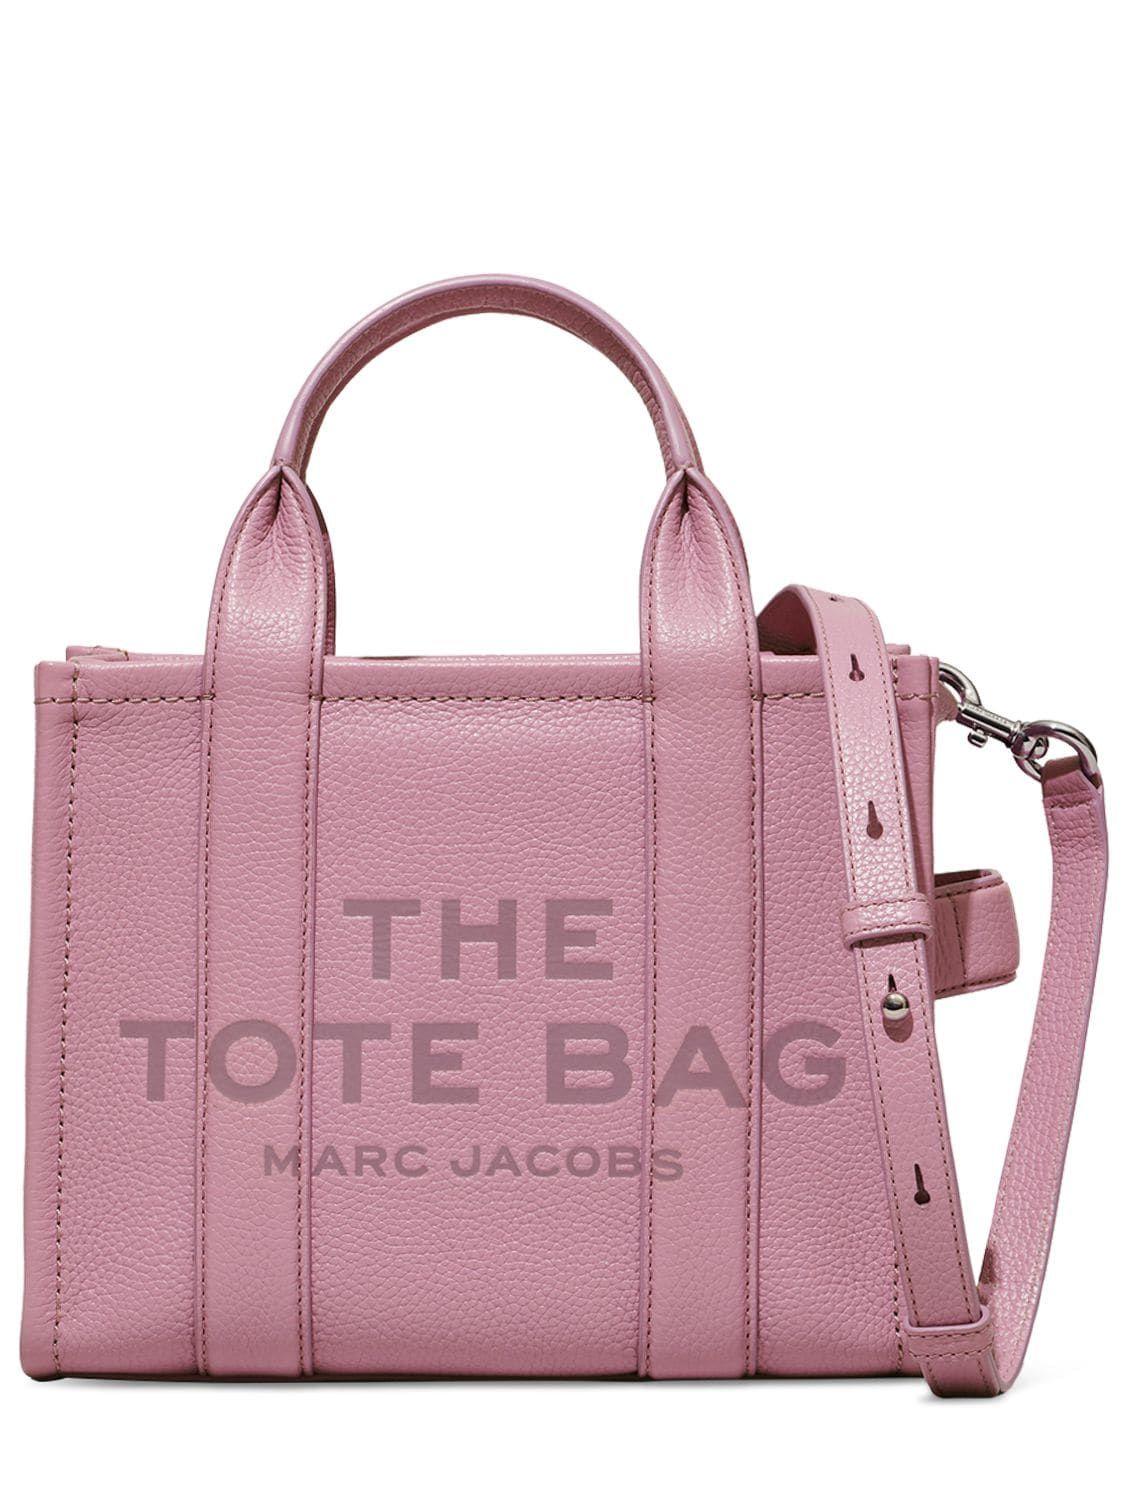 Marc Jacobs The Mini Tote Croc Embossed Bag in Pink | Lyst